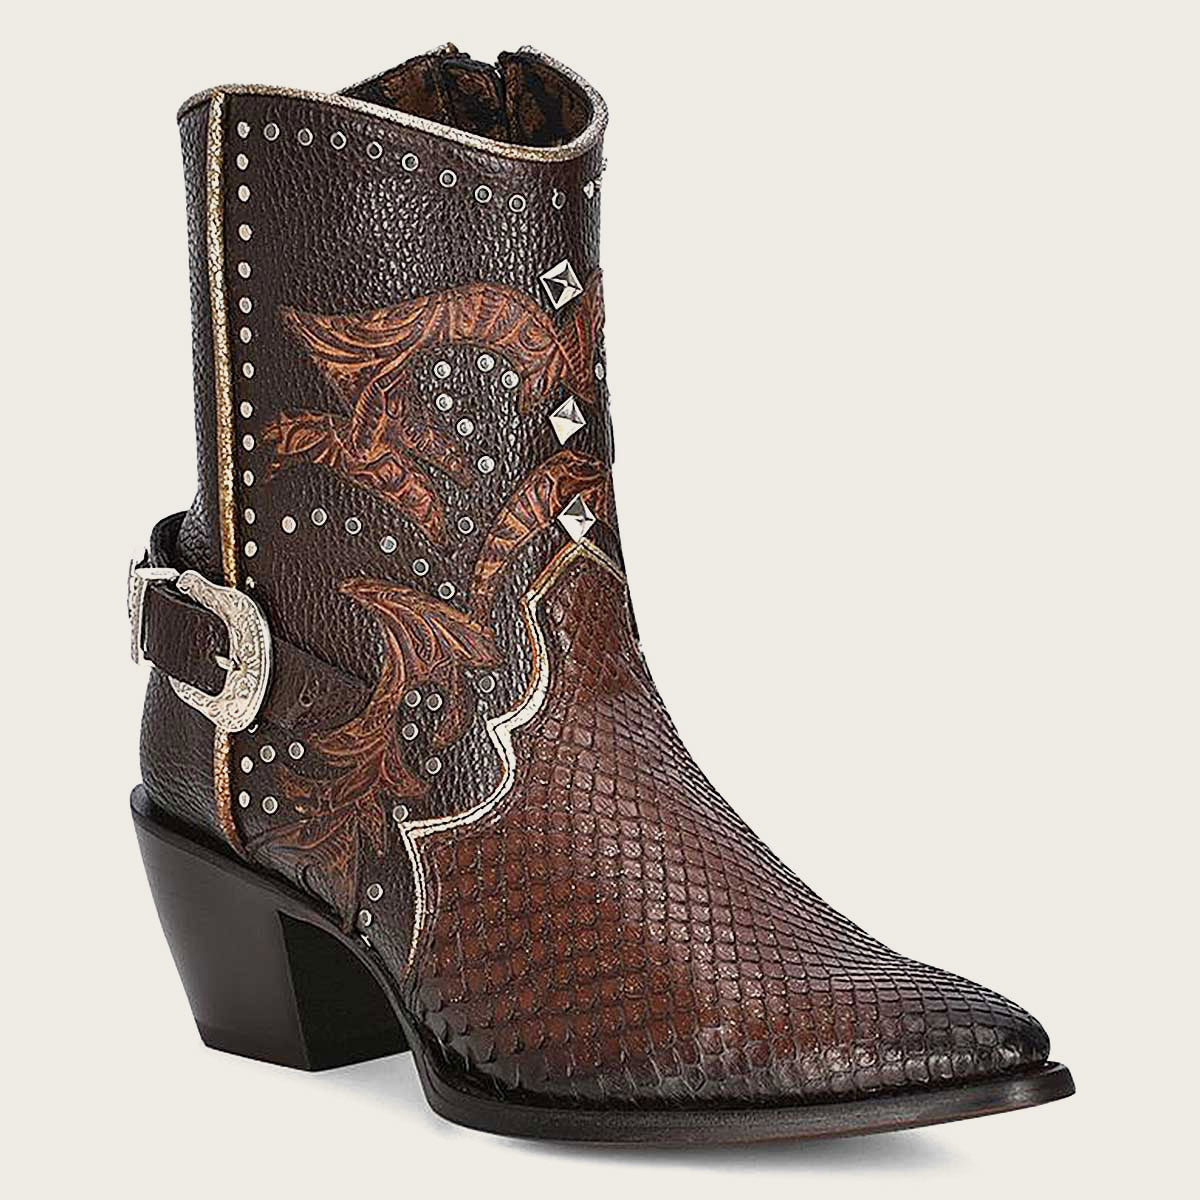 Brown western exotic leather bootie, made from premium quality leather. Unique texture and pattern, with classic design and modern detailing.